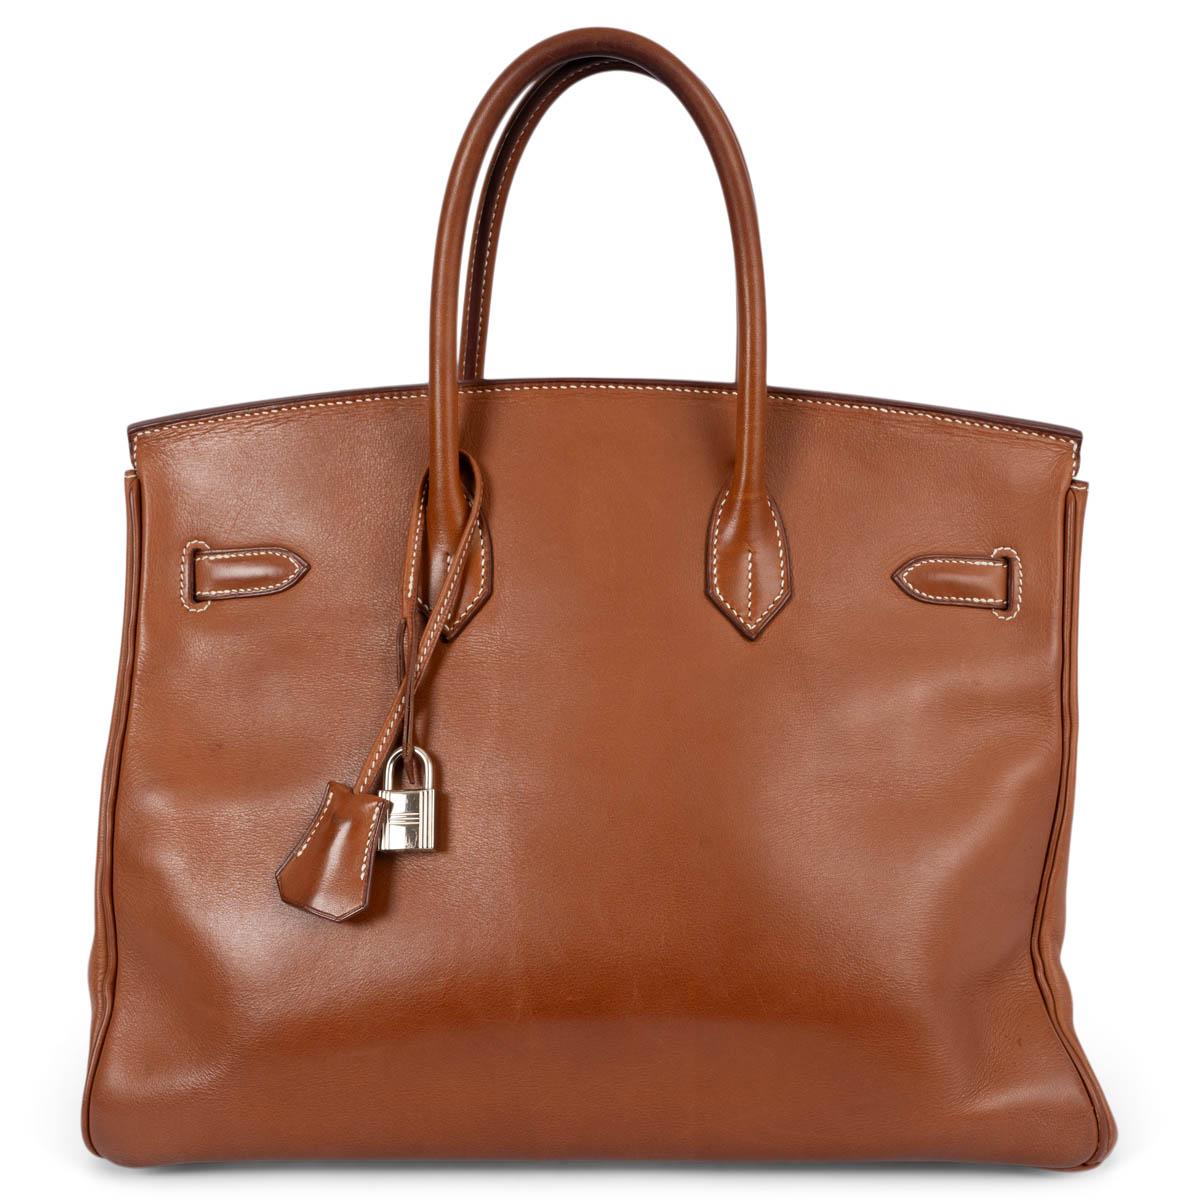 HERMES Fauve cognac Barenia leather BIRKIN 35 Bag PHW In Good Condition For Sale In Zürich, CH